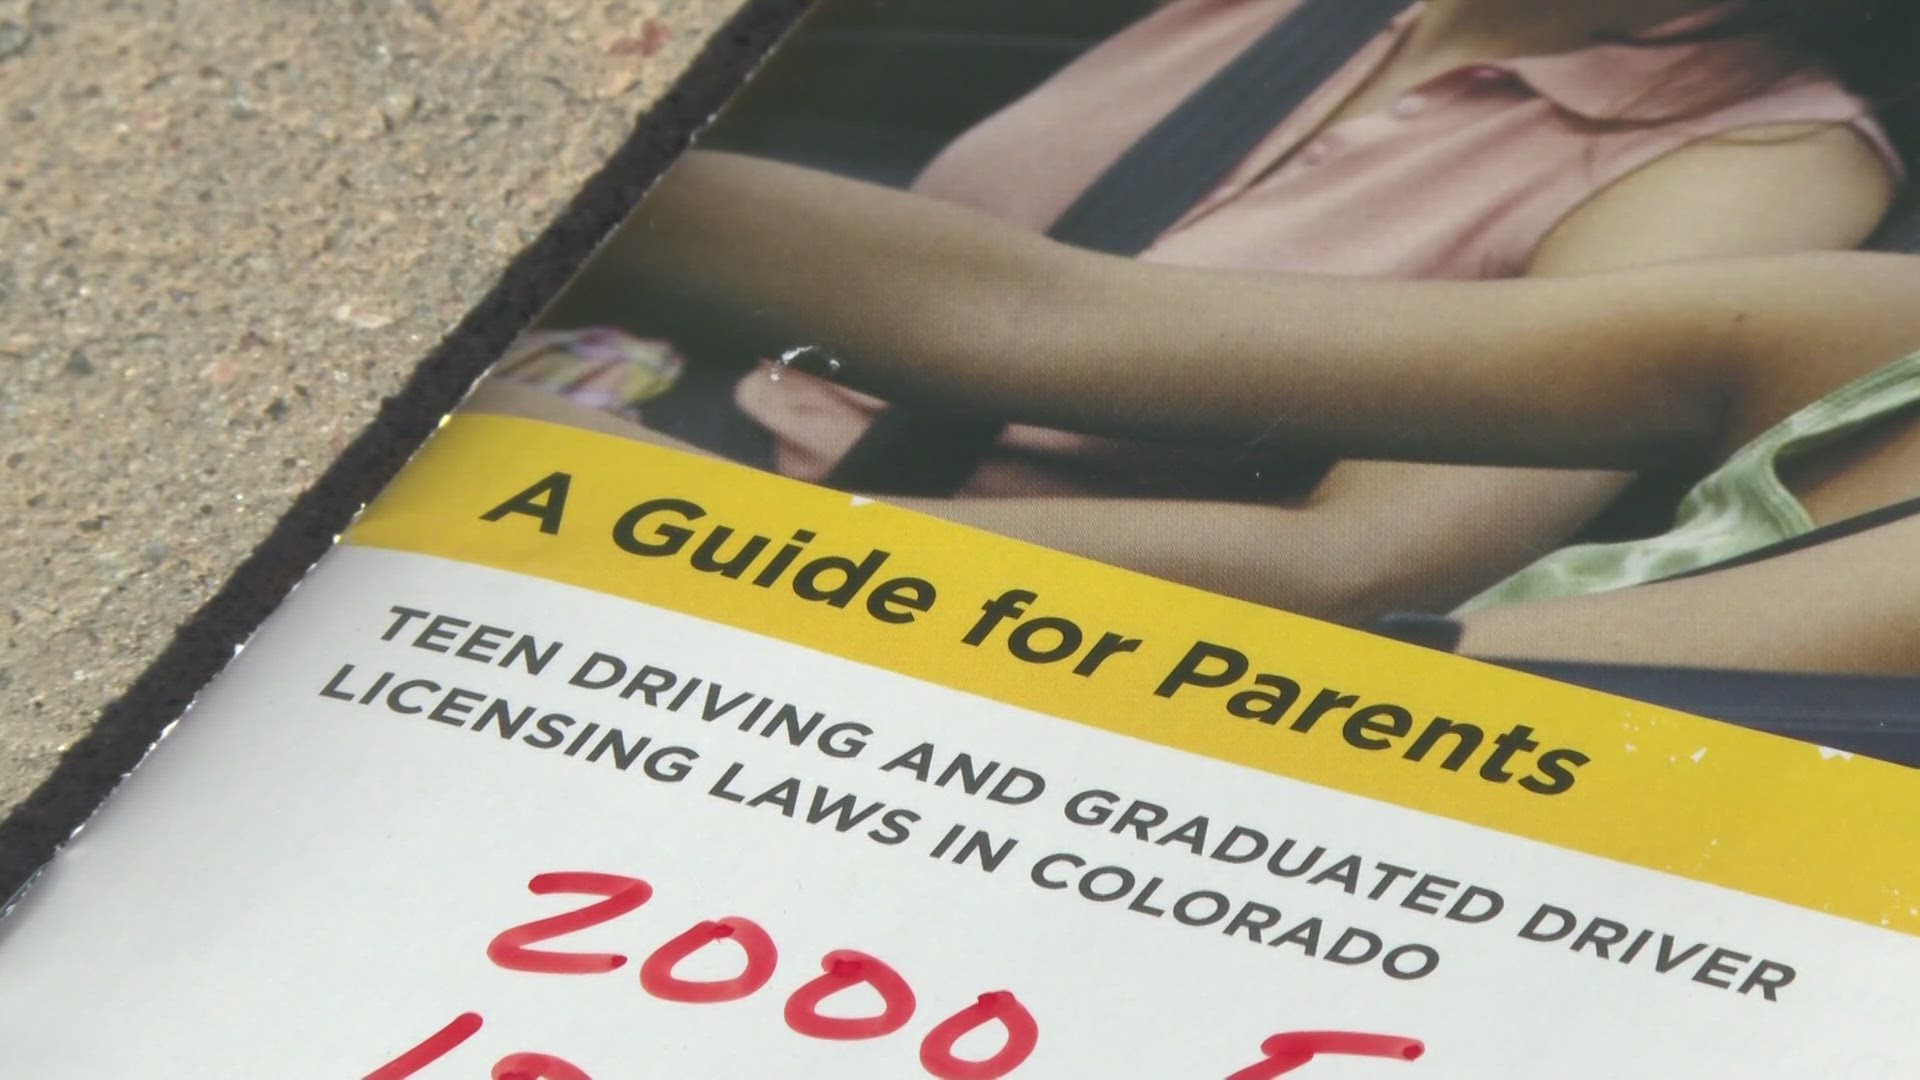 Deaths among teen drivers are up 53 percent compared to last year. So far this year, 61 teen drivers have died on roadways across the state.